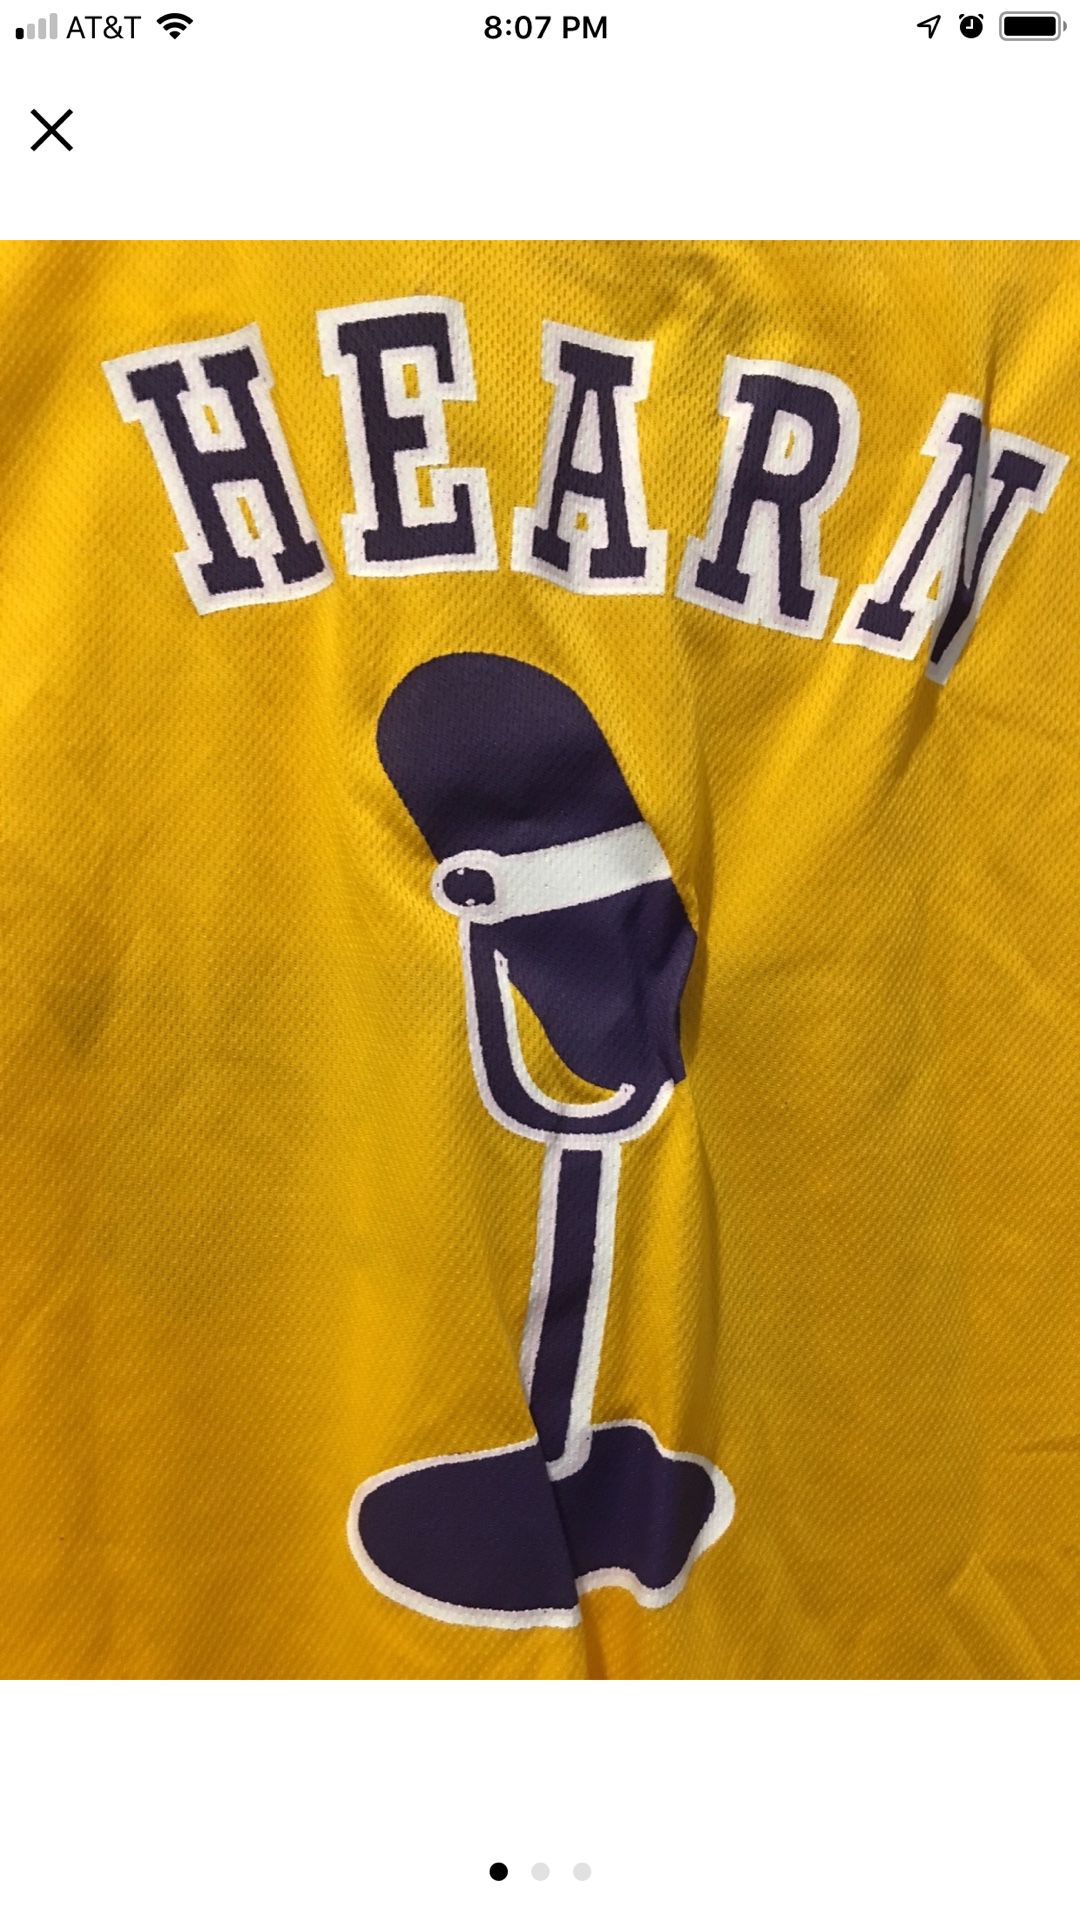 Lakers Jersey Chick Hearn NBA brand new